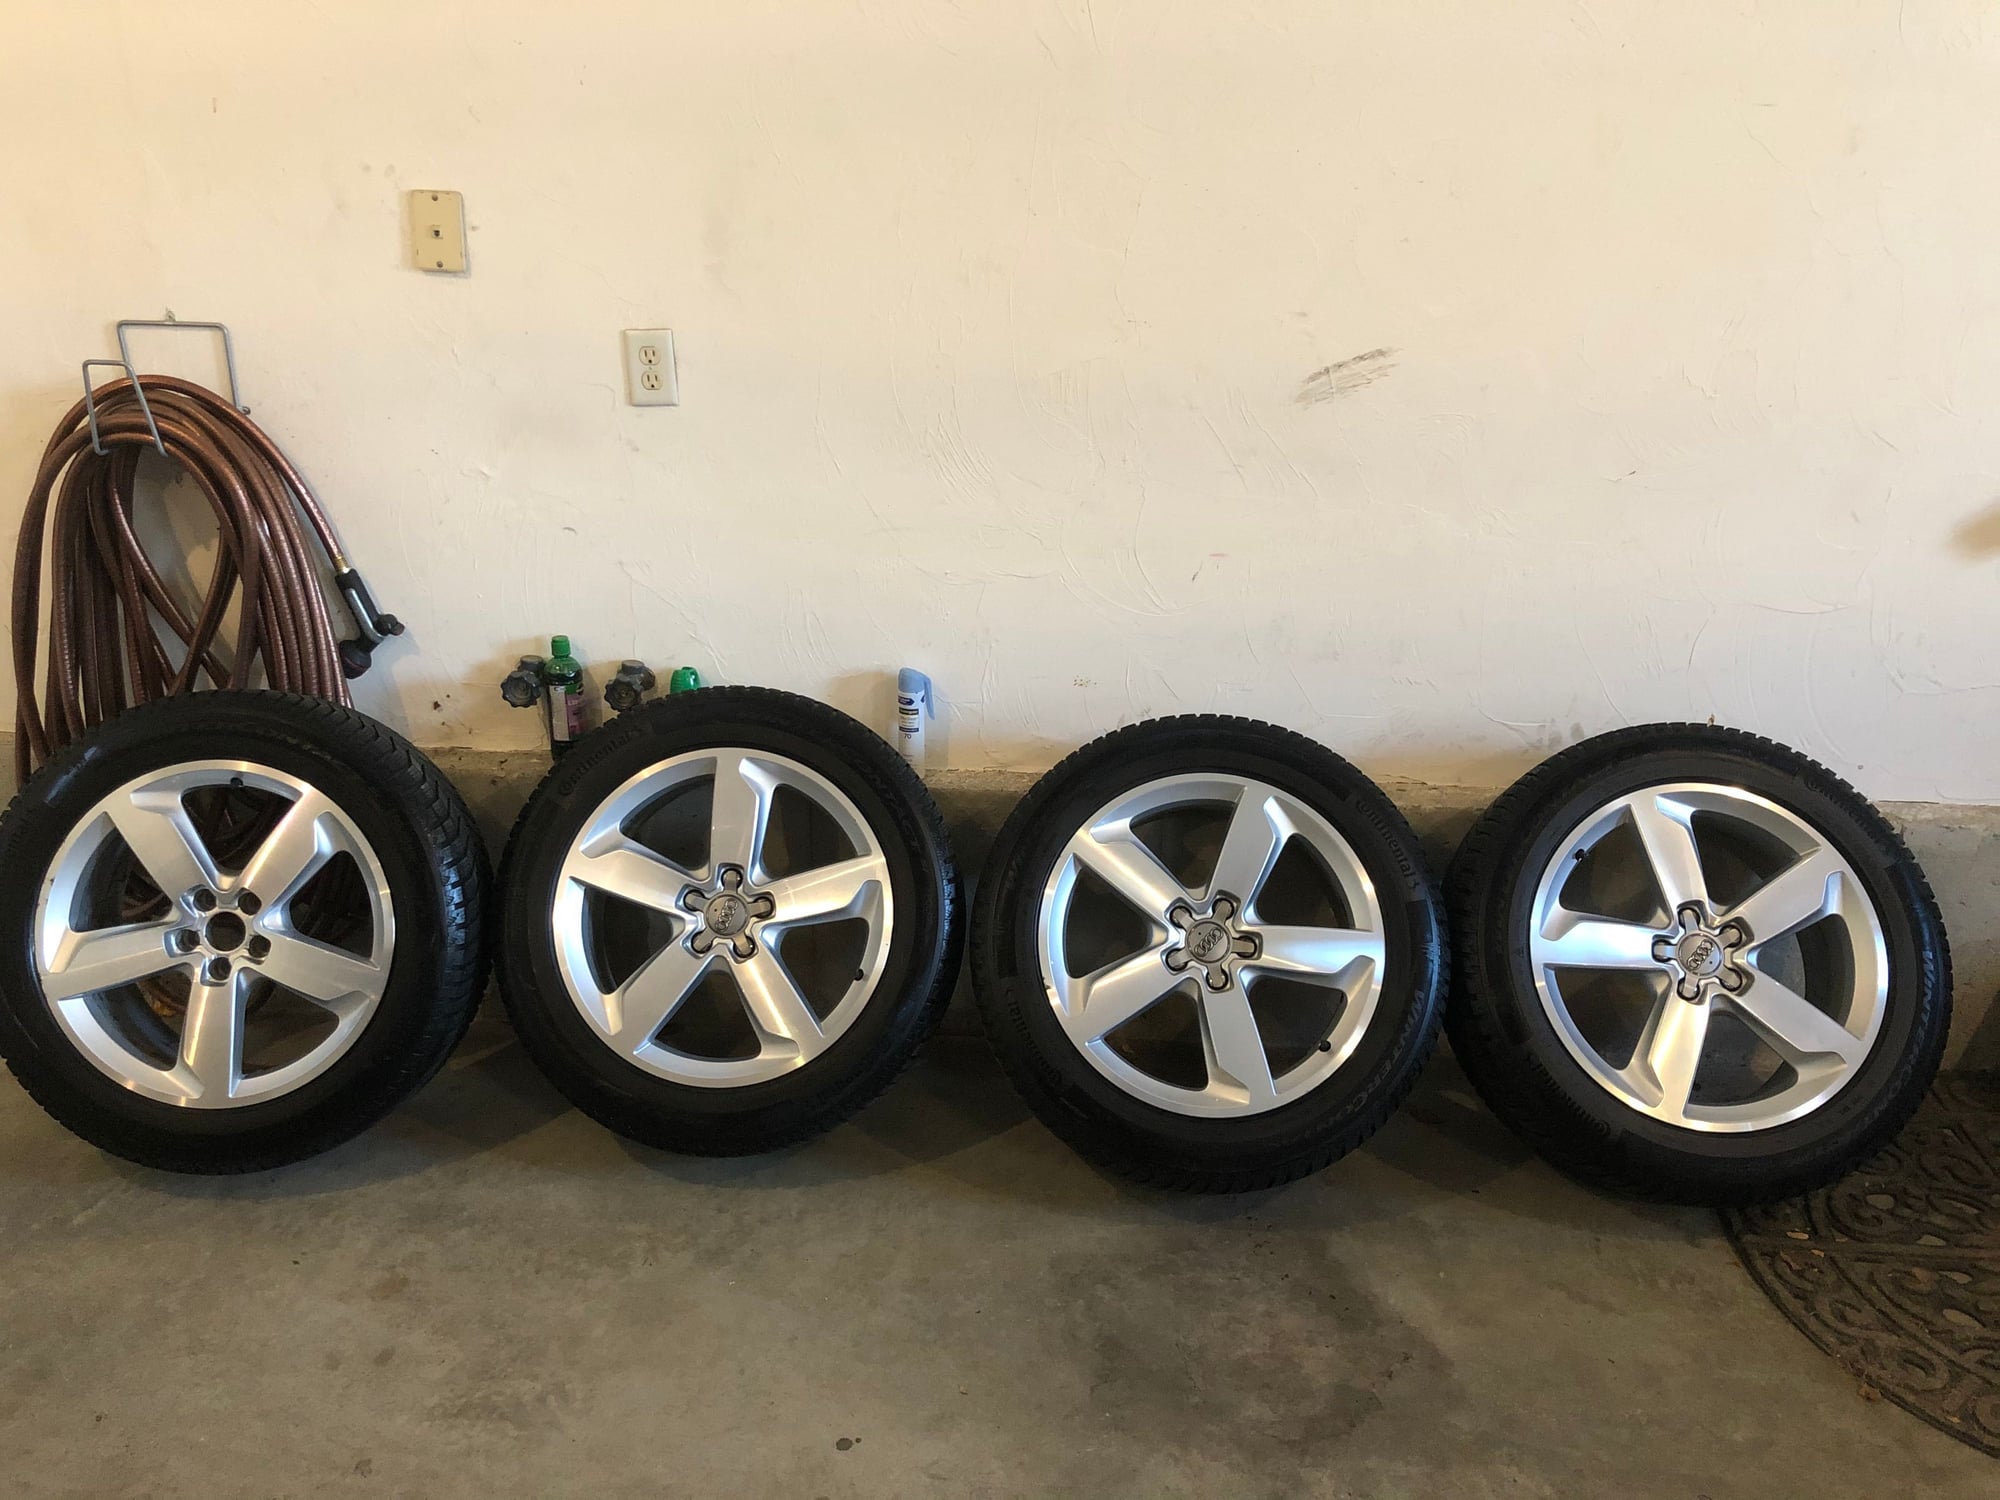 Wheels and Tires/Axles - Audi Q5: Winter Tire & Wheel Package - Used - 2008 to 2015 Audi Q5 - Leominster, MA 01453, United States